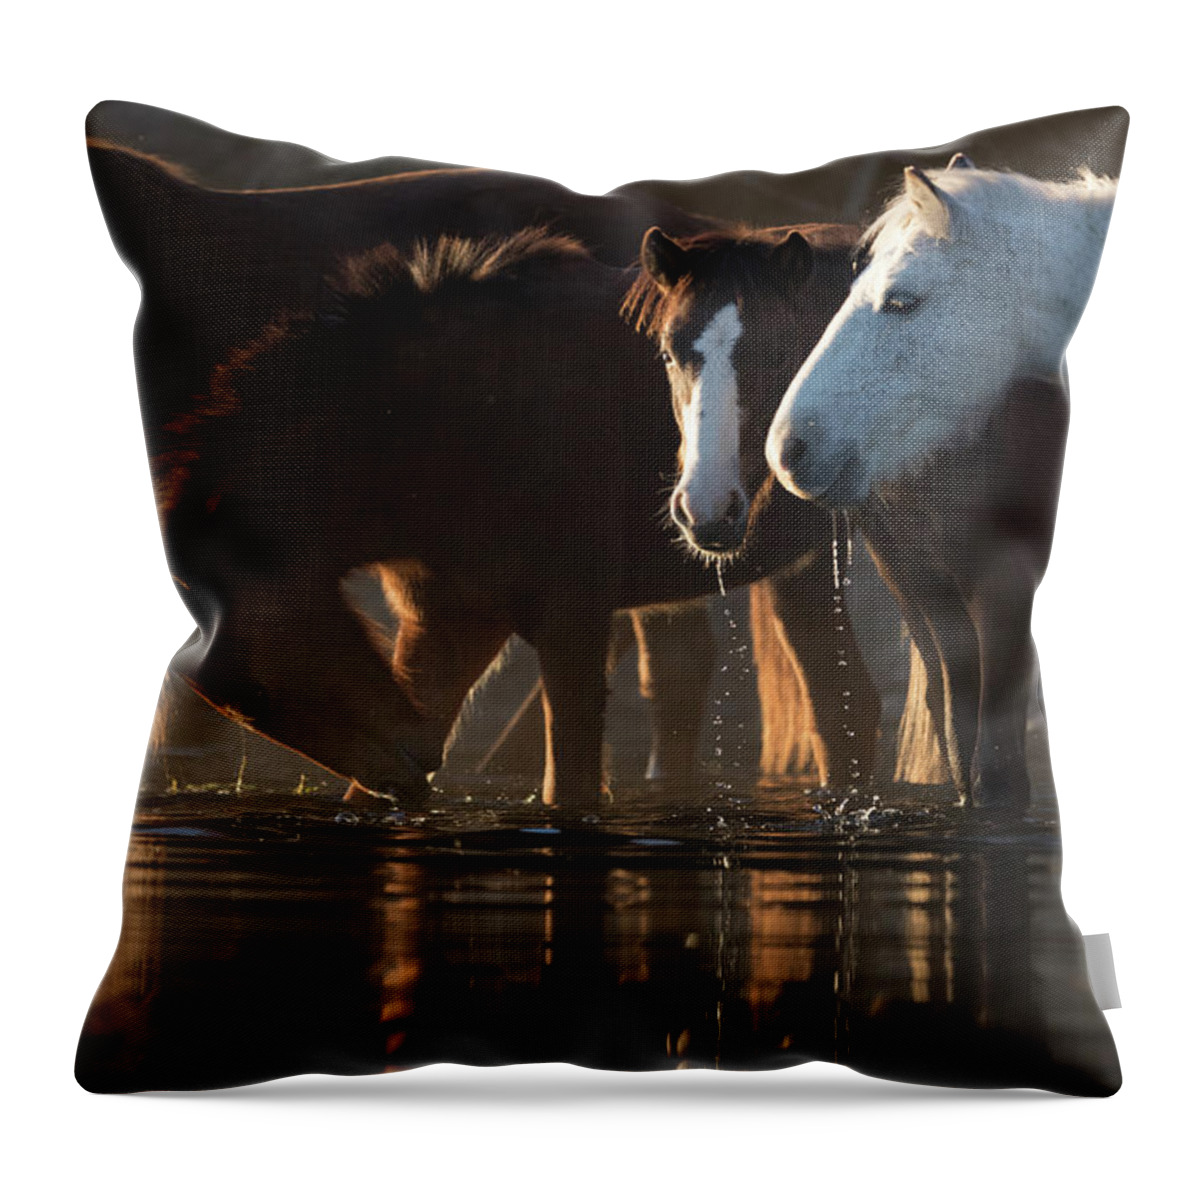 Salt River Wild Horses Throw Pillow featuring the photograph Morning Drink by Shannon Hastings